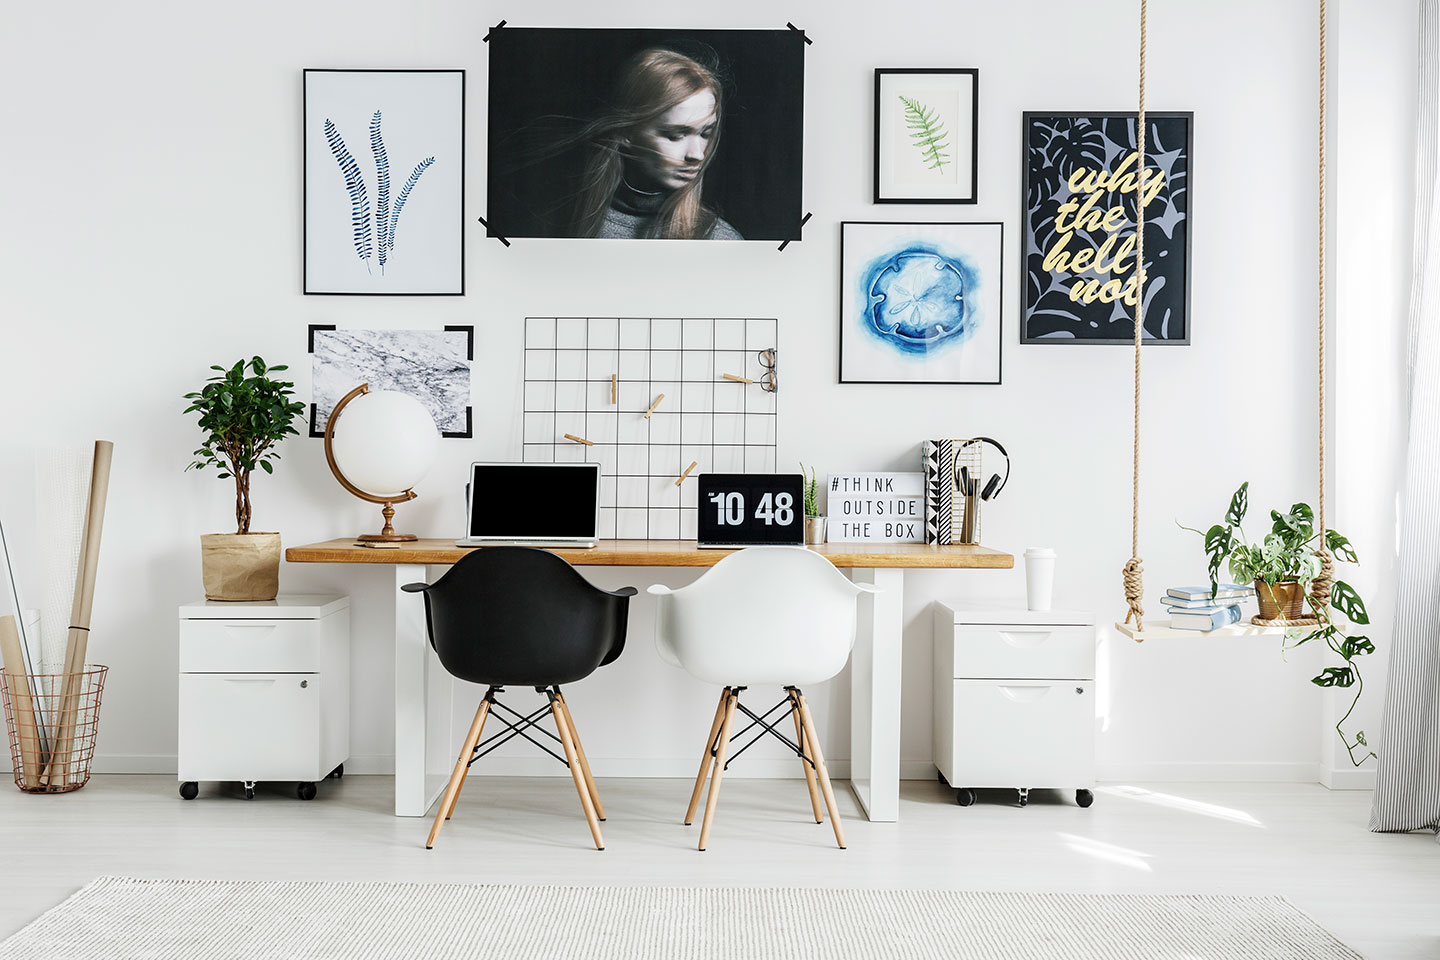 Two seater Black & White Workspace